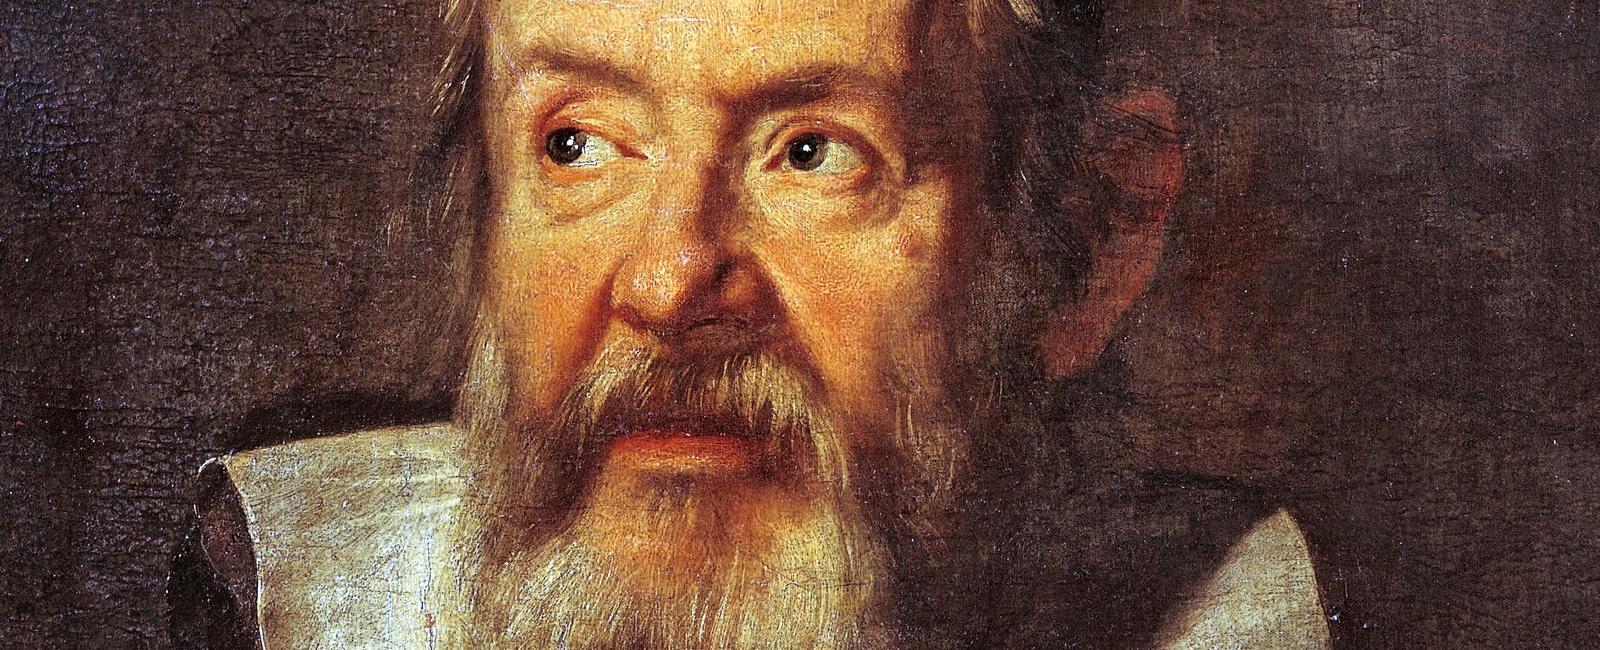 Italian scientist galileo developed telescopes and used them to make revolutionary observations about our solar system discovering new objects like the moons that orbit jupiter